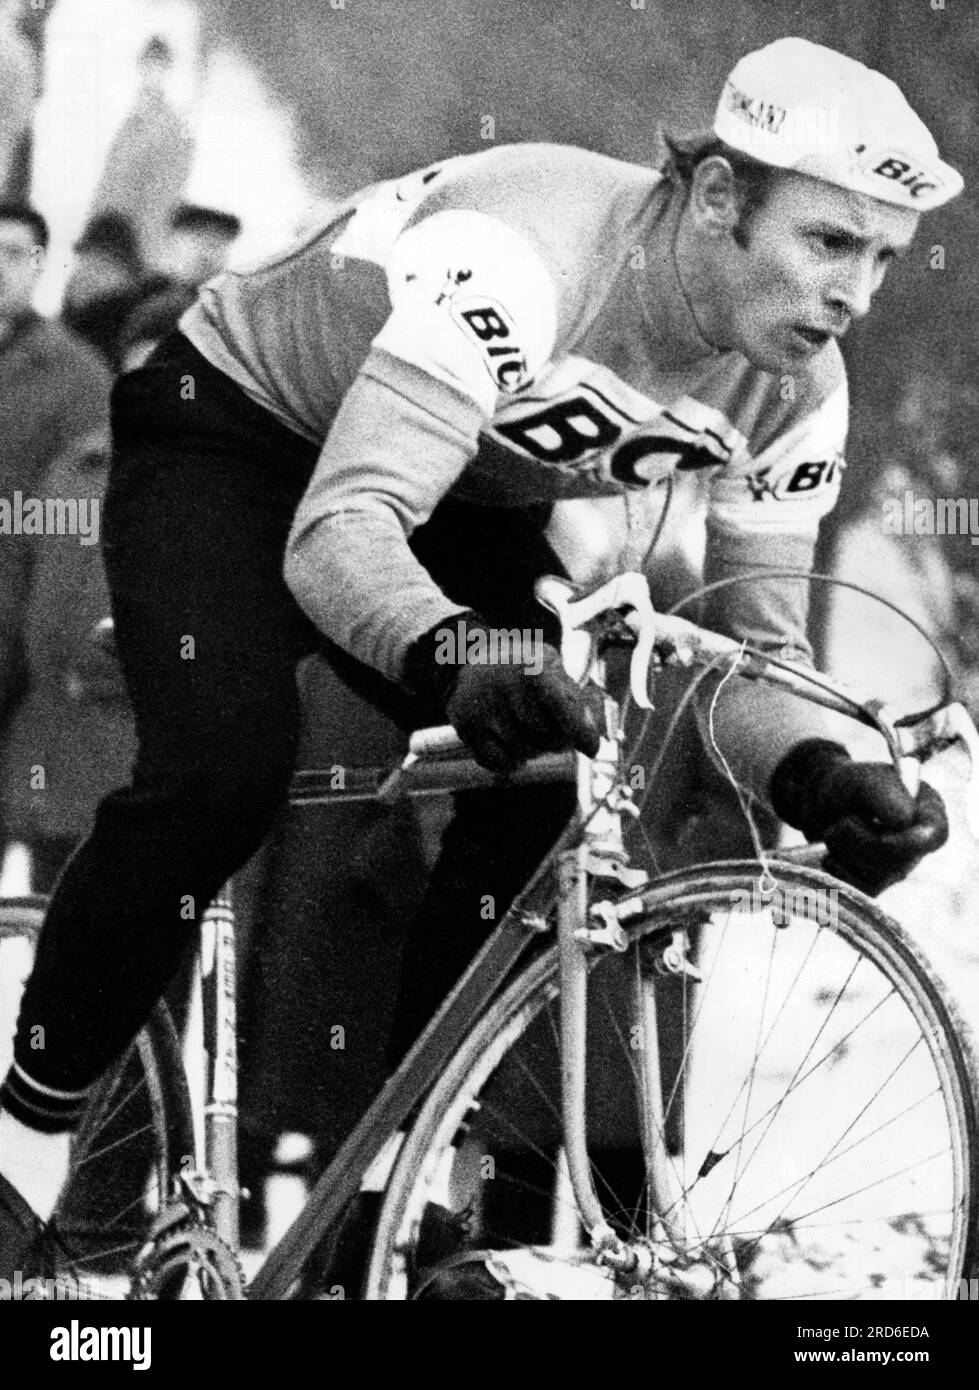 Wolfshohl, Rolf, * 27.12.1938, German athlete (racing cyclist), during cross-country race, 1970, ADDITIONAL-RIGHTS-CLEARANCE-INFO-NOT-AVAILABLE Stock Photo